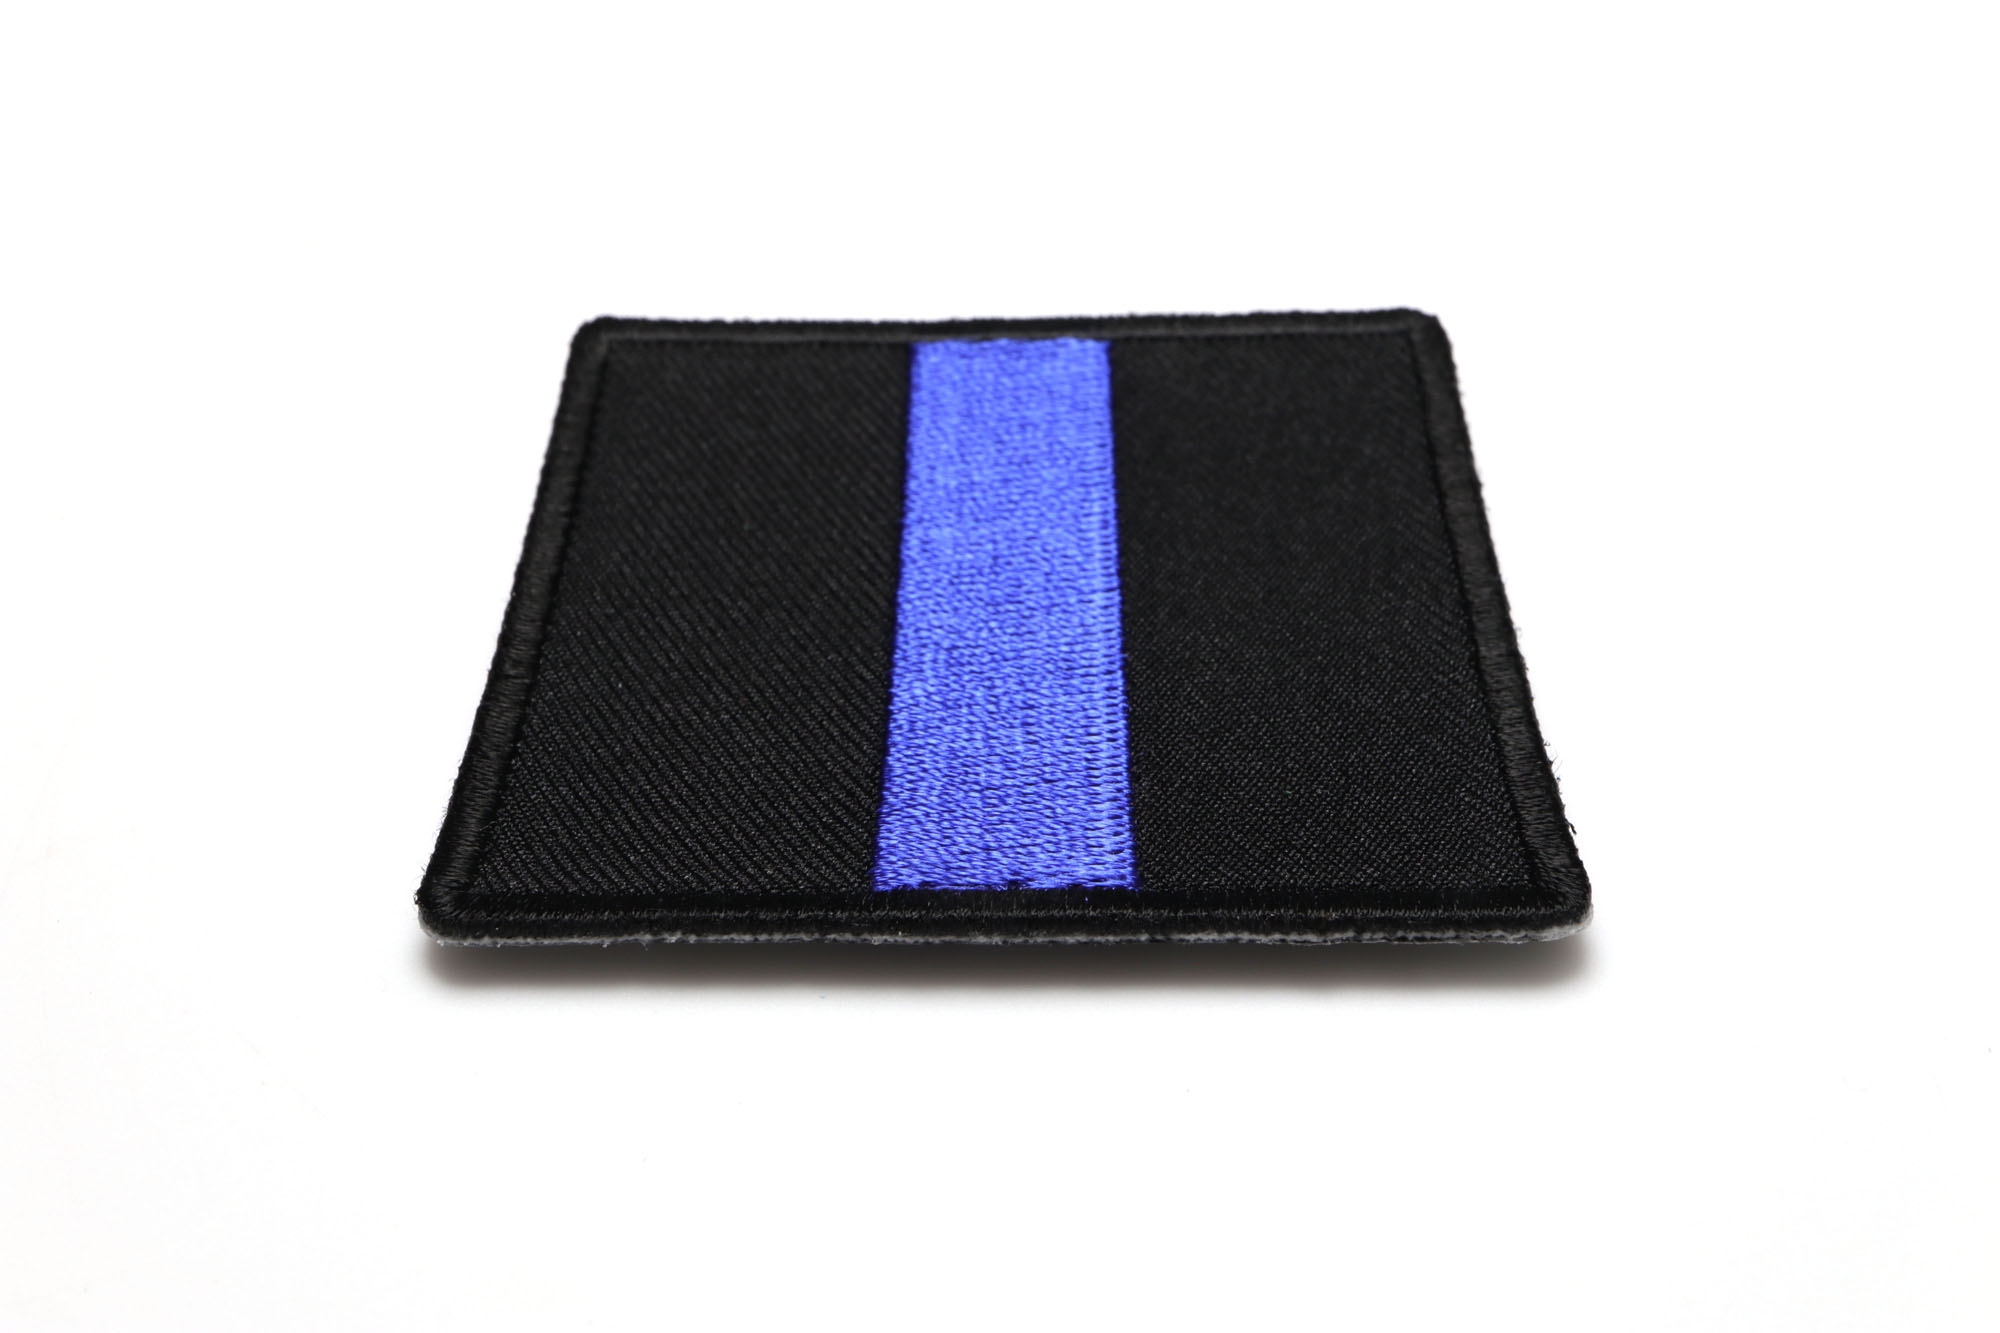 Thin Blue Line Patches, you don